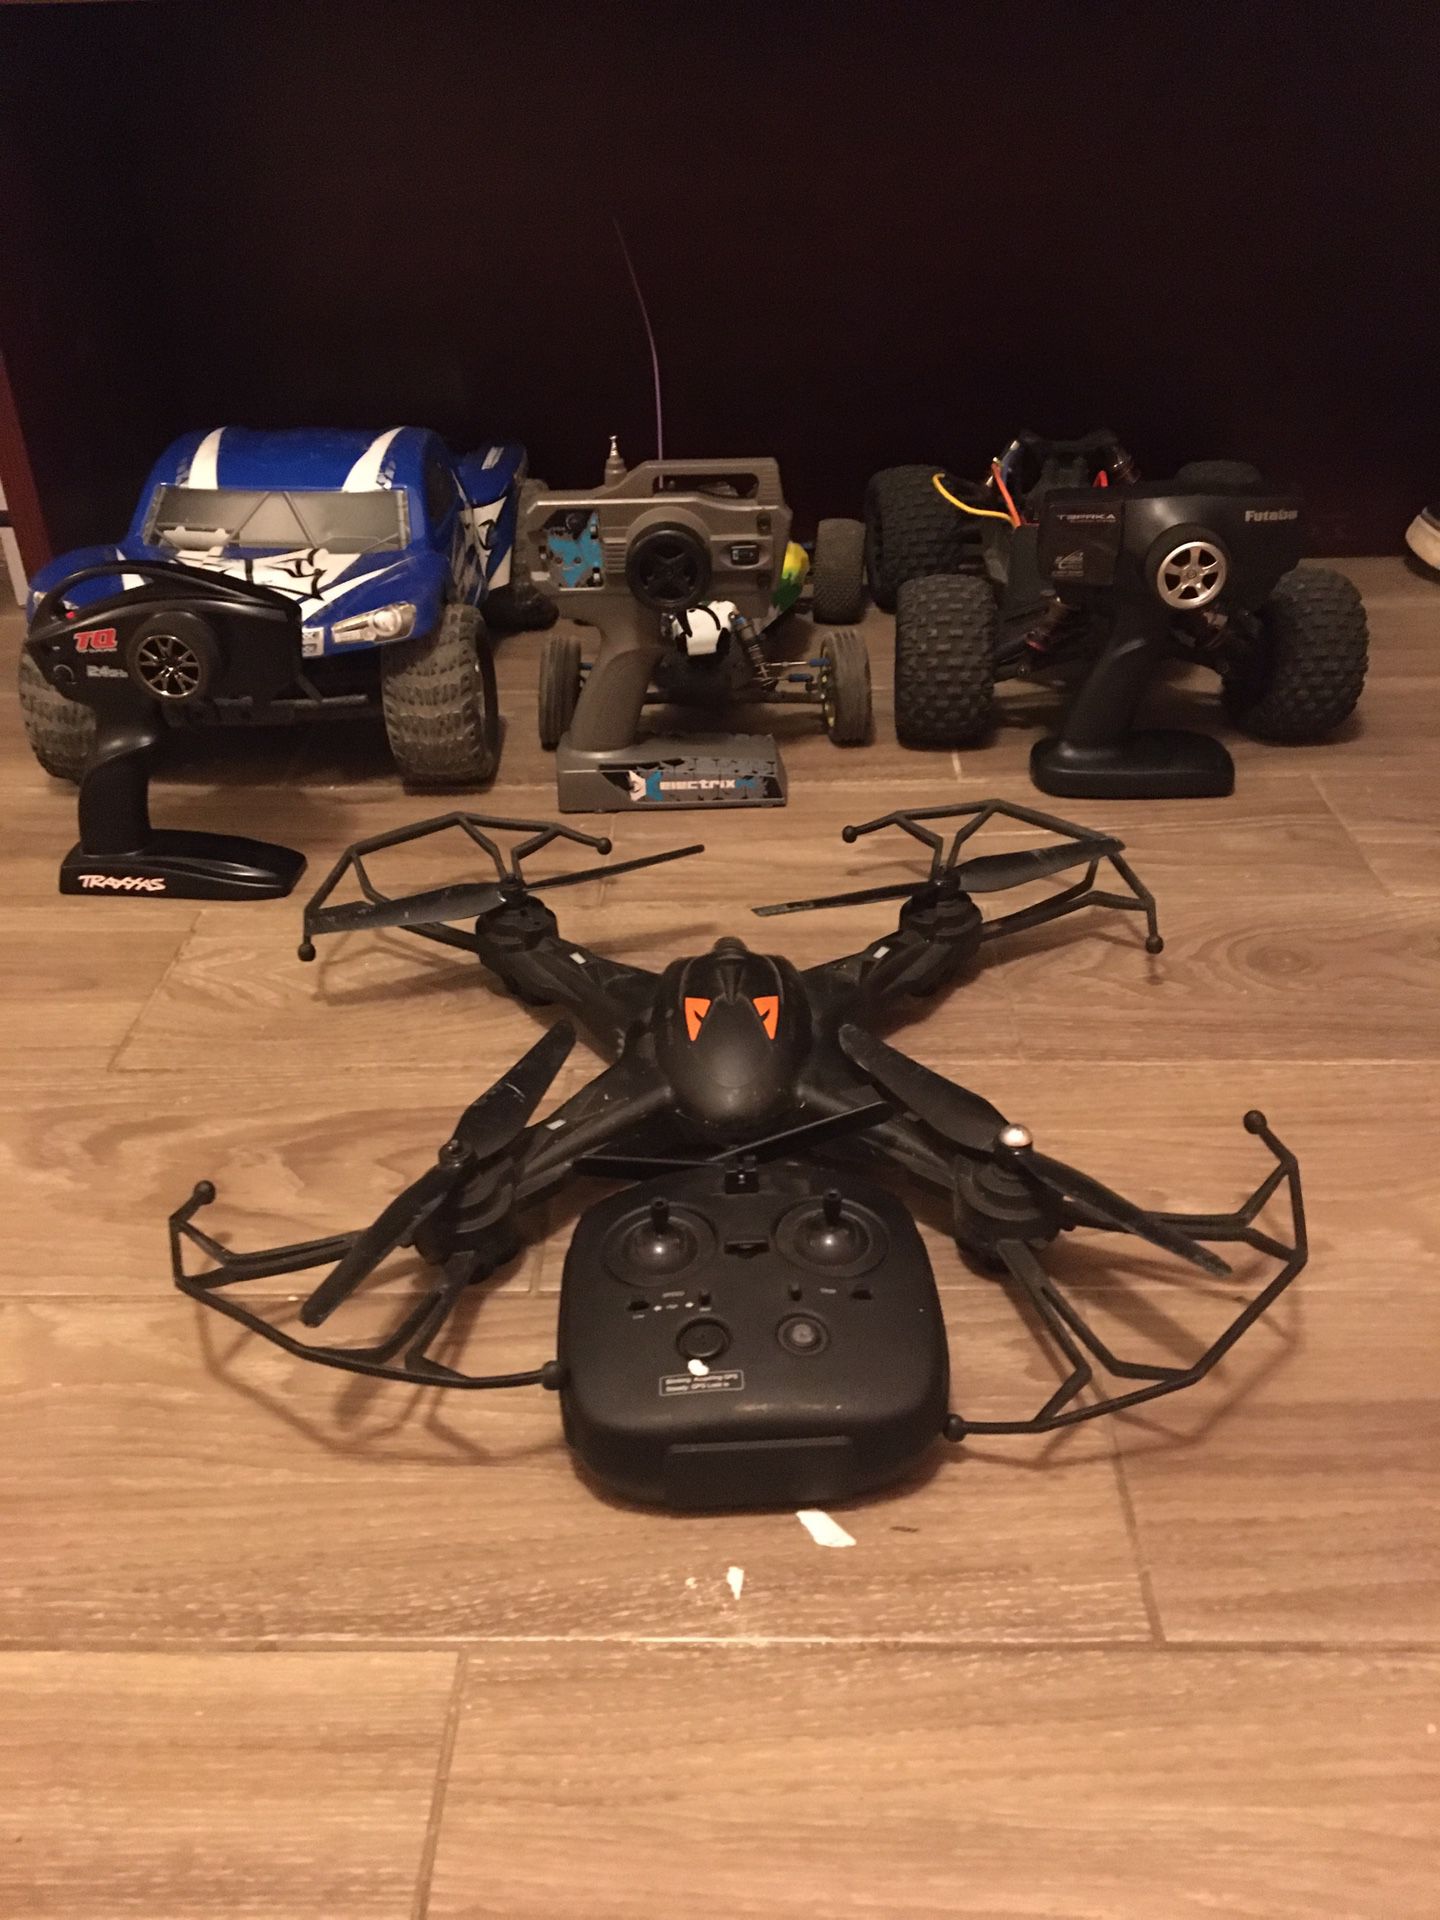 3 rc cars and drone